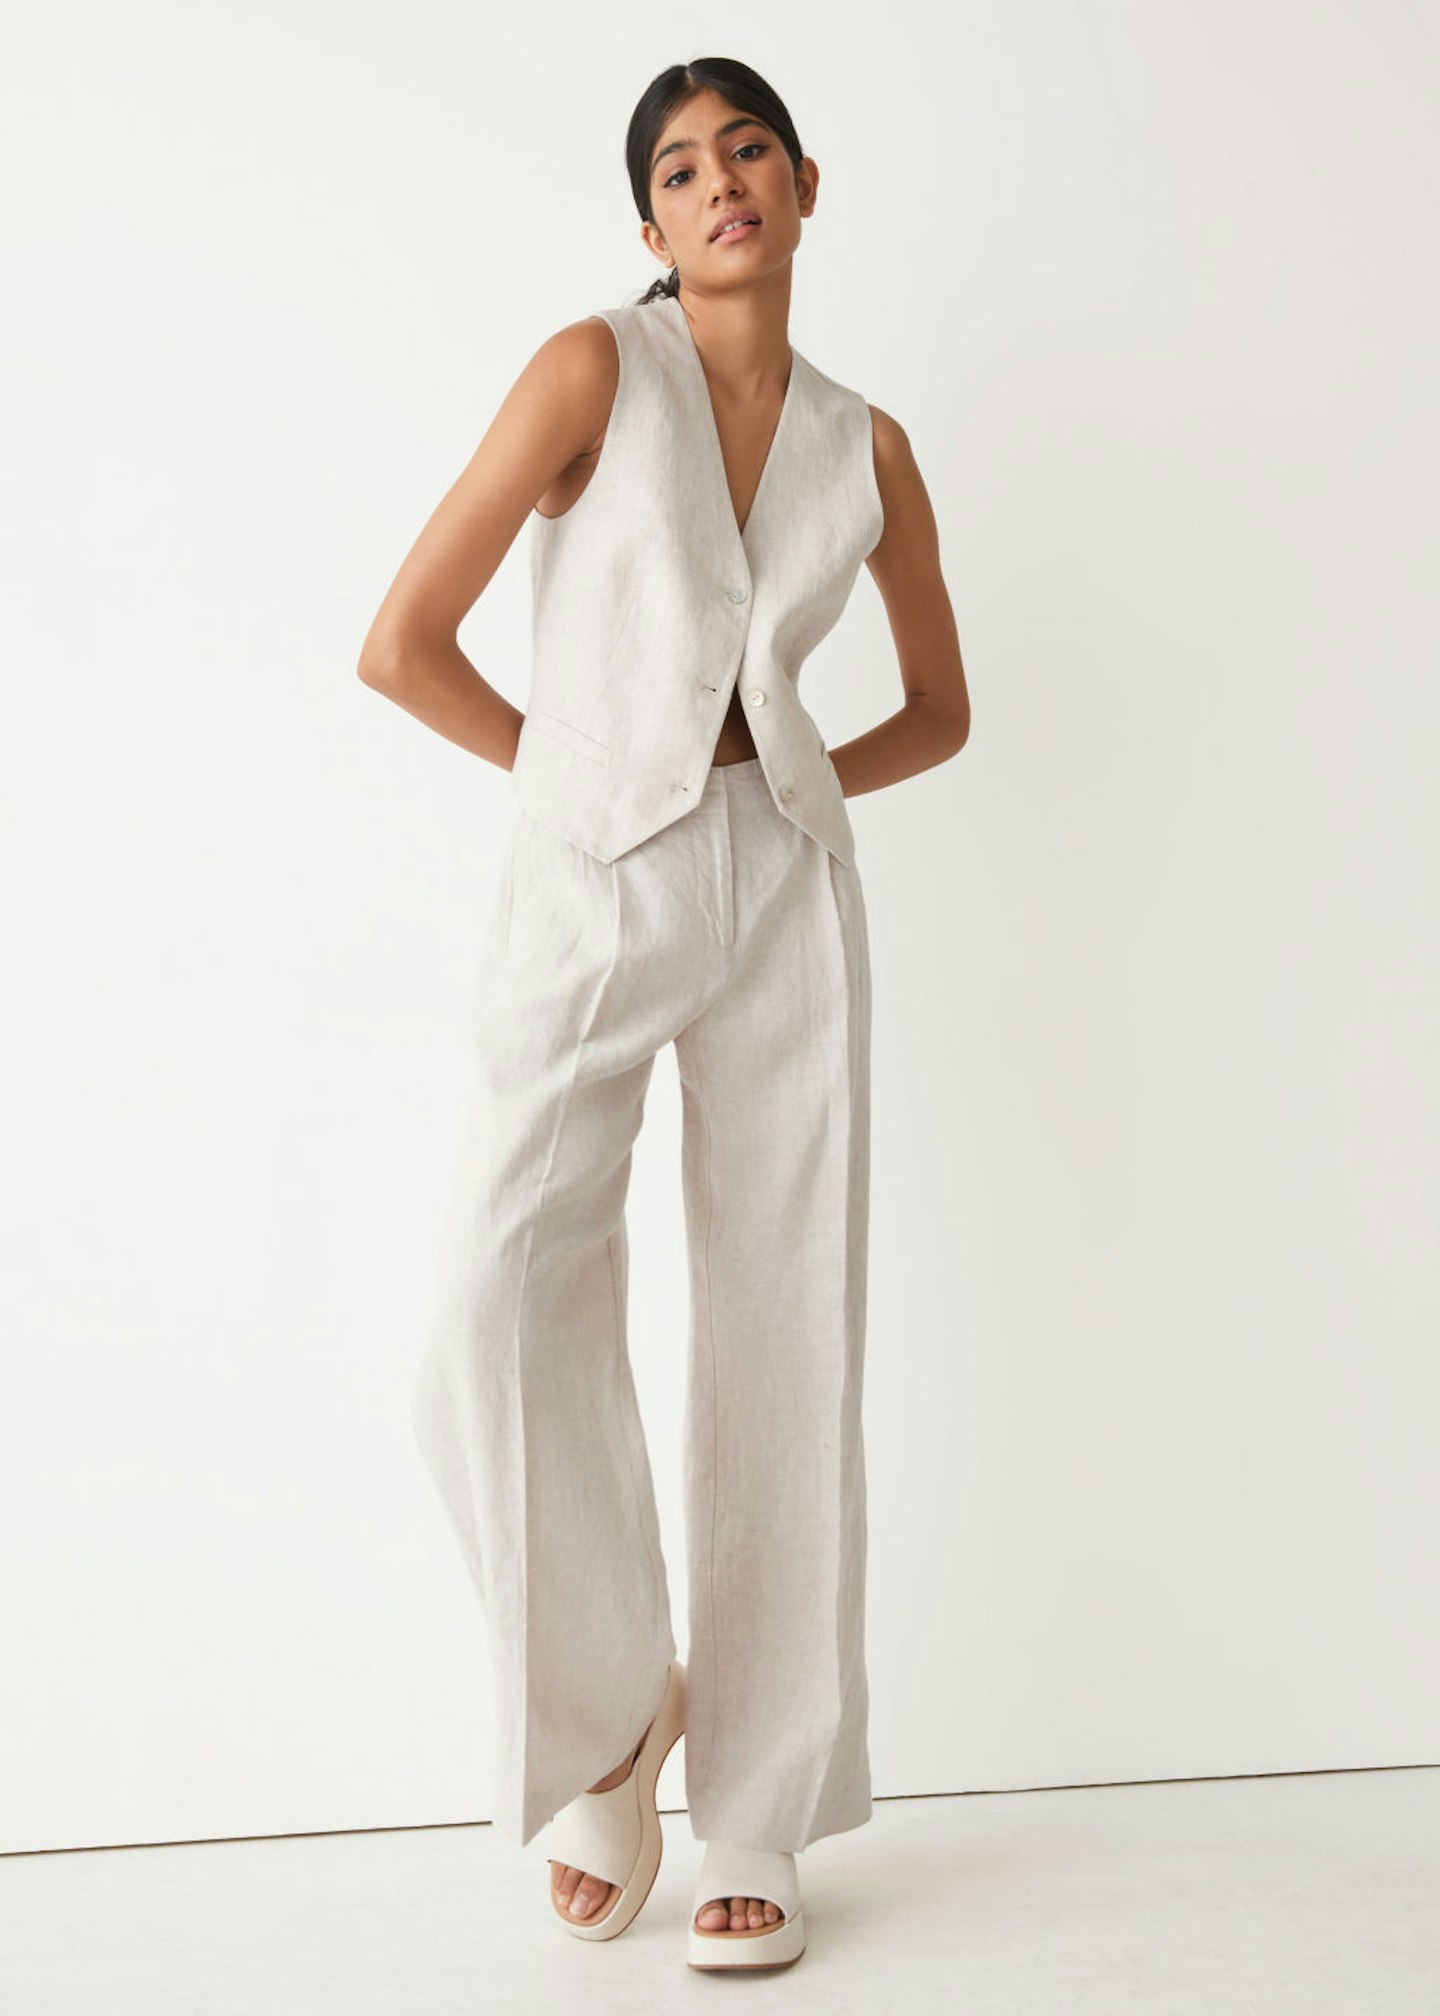 rain bad weather fashion & Other Stories, High Waist Linen Trousers, £85